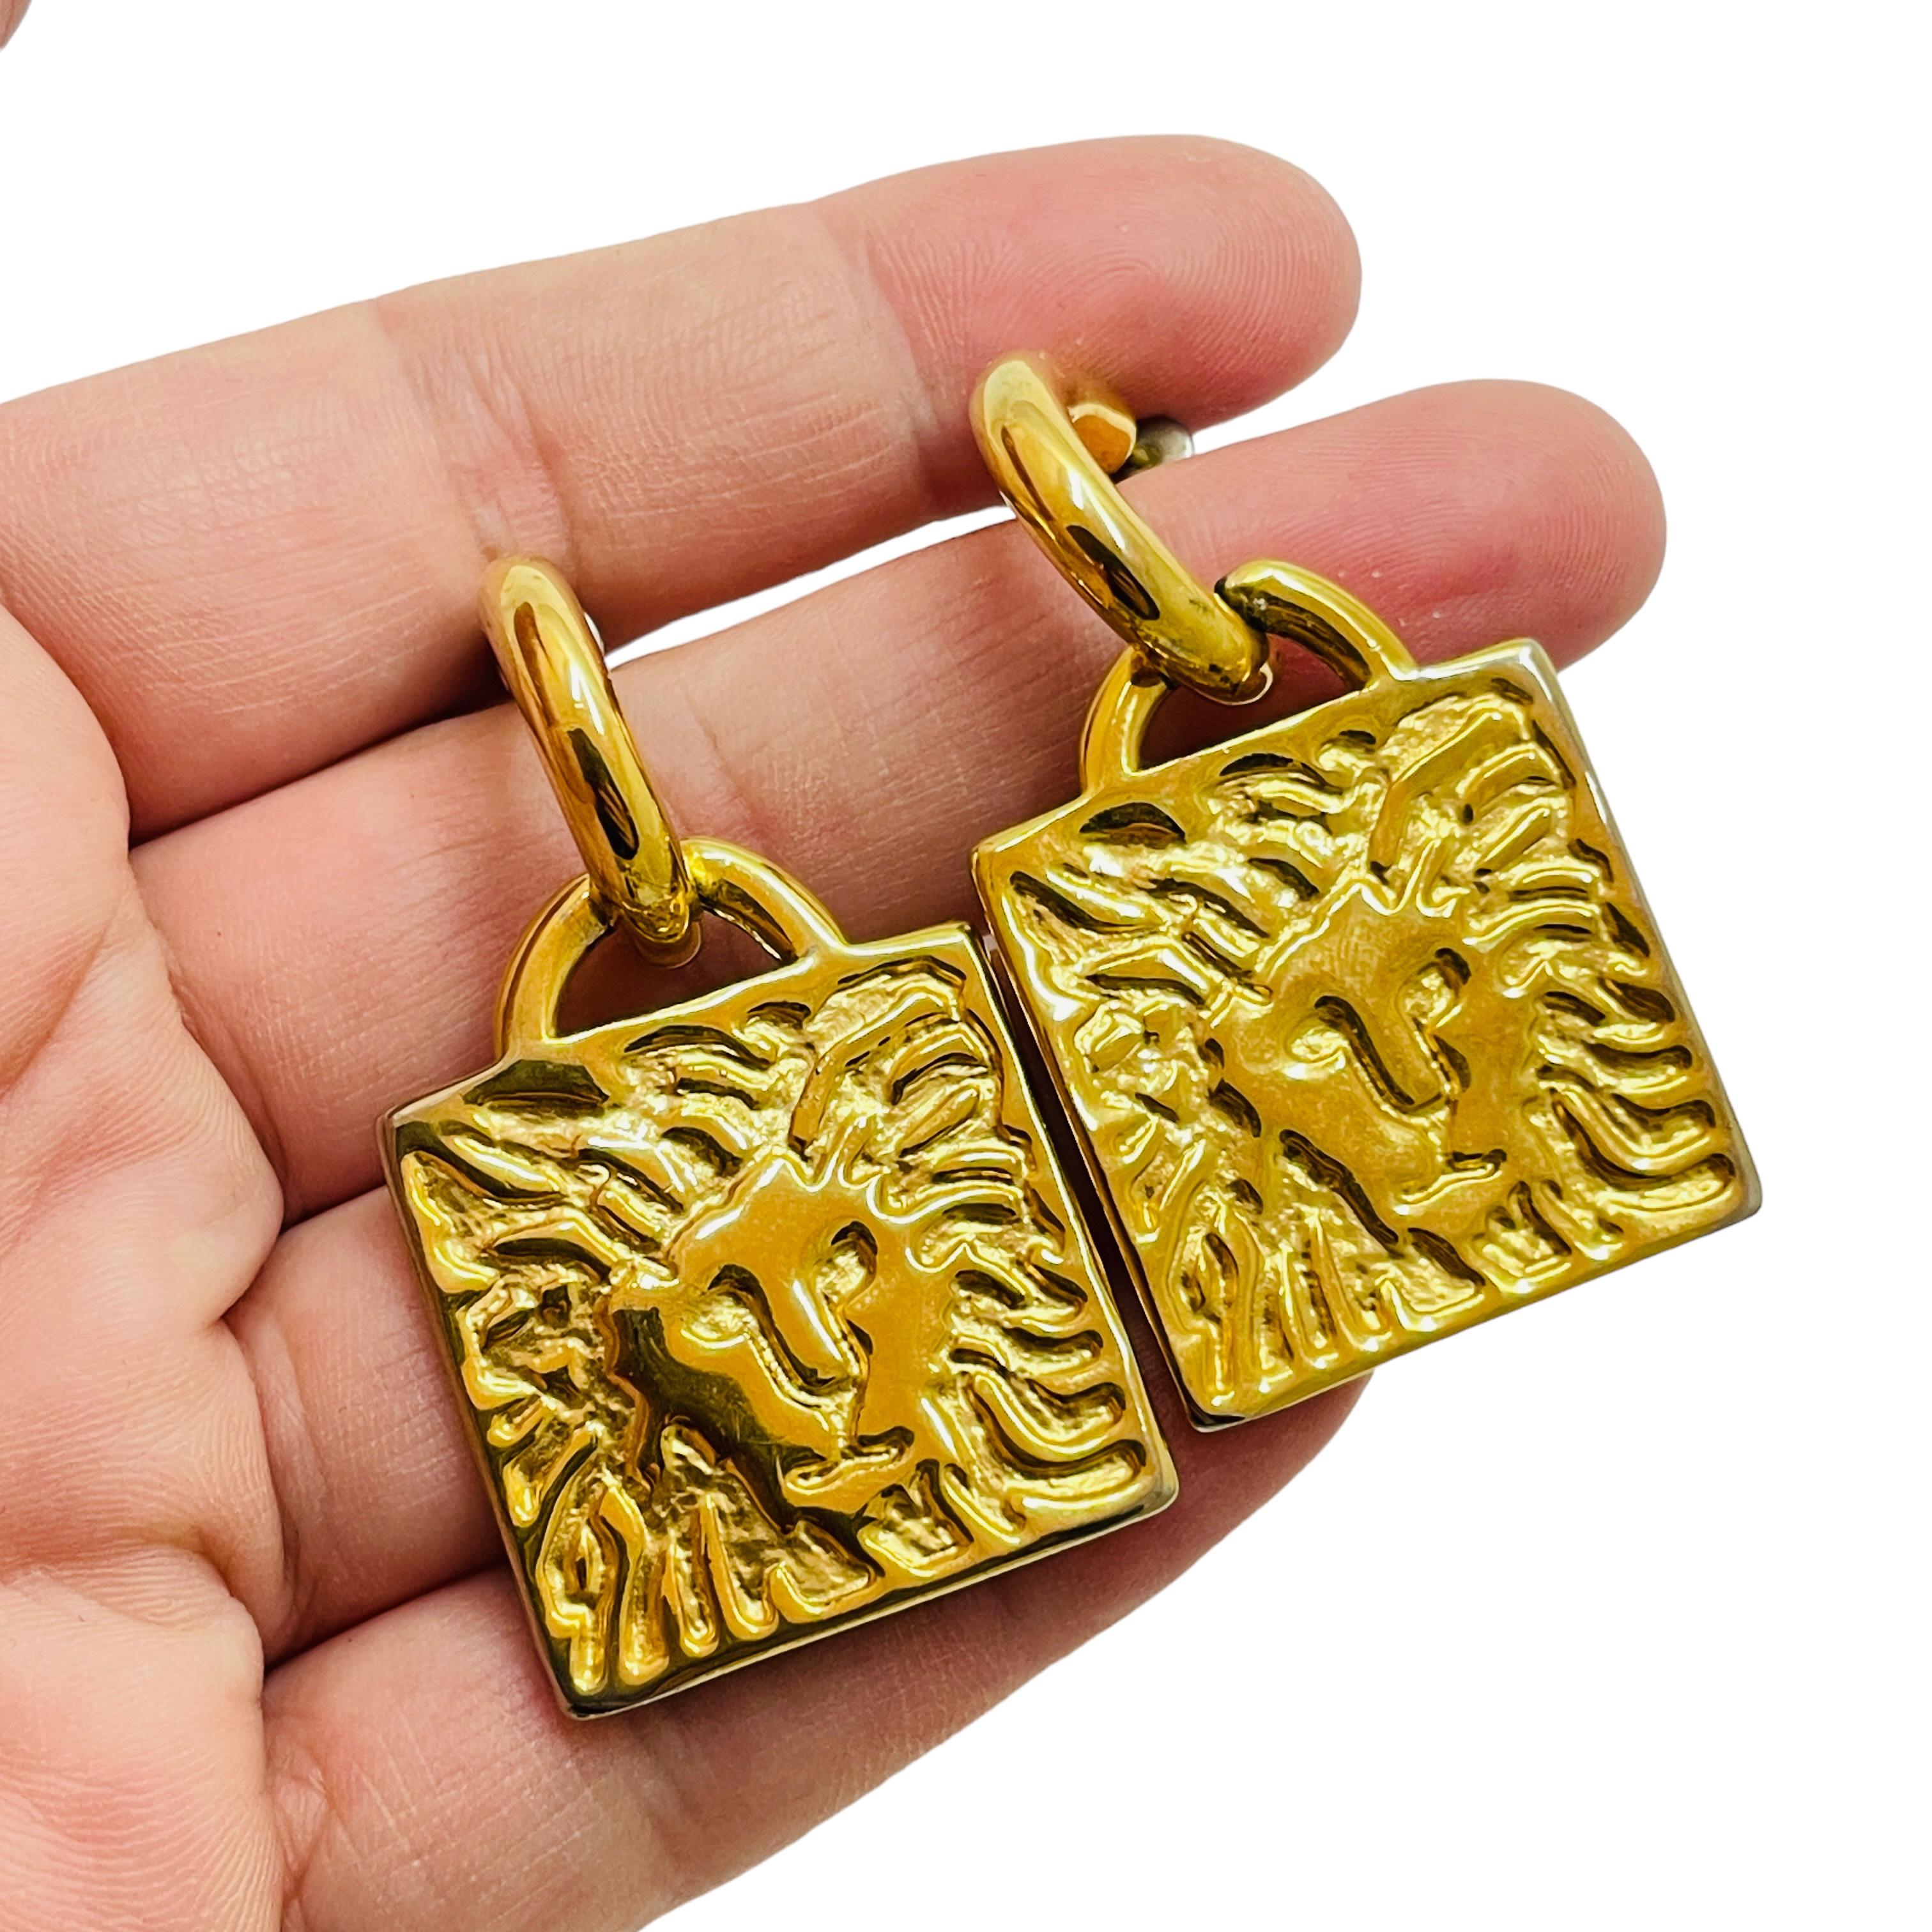 Vintage ANNE KLEIN gold lion pierced earrings In Excellent Condition For Sale In Palos Hills, IL